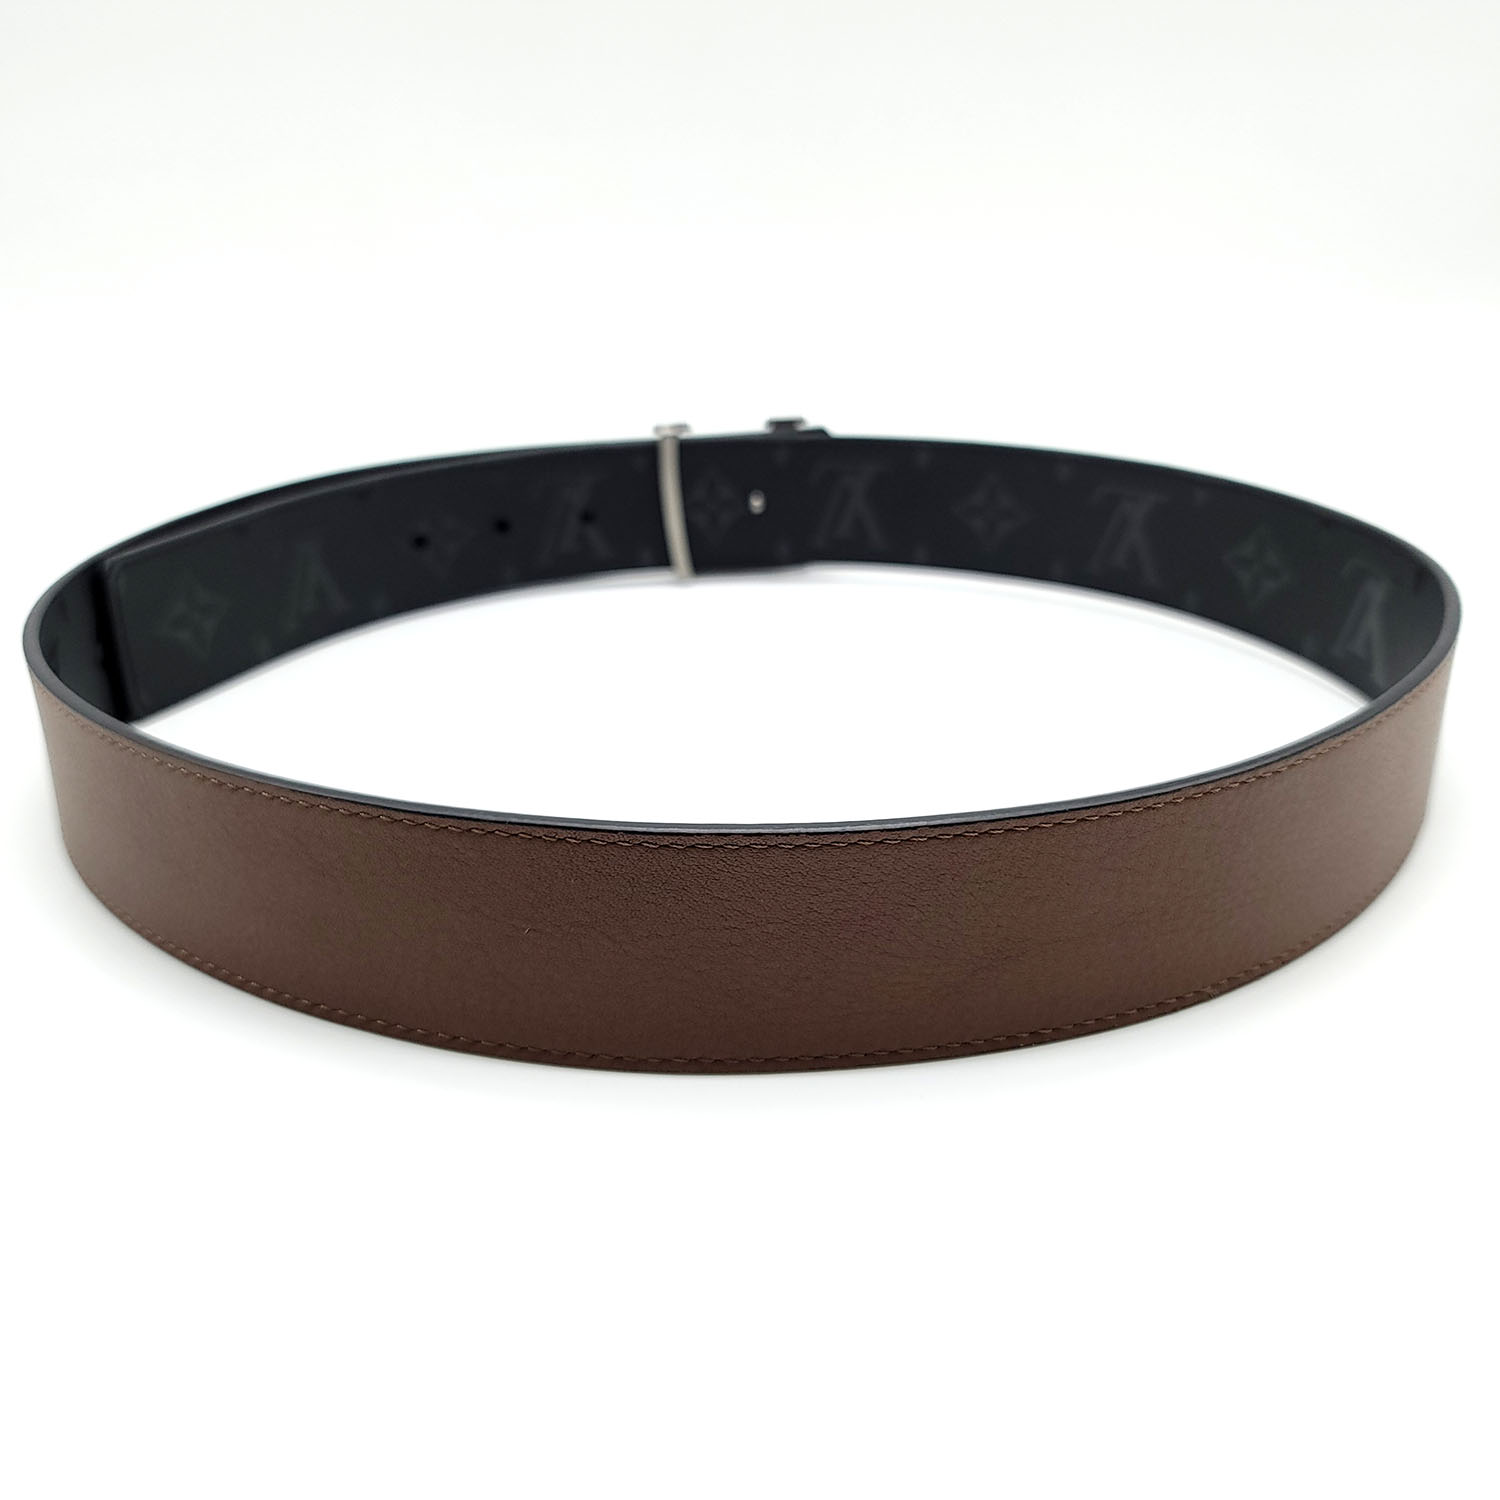 SOLD - NEW - LV Pyramide 40mm Reversible Belt_Louis Vuitton_BRANDS_MILAN  CLASSIC Luxury Trade Company Since 2007